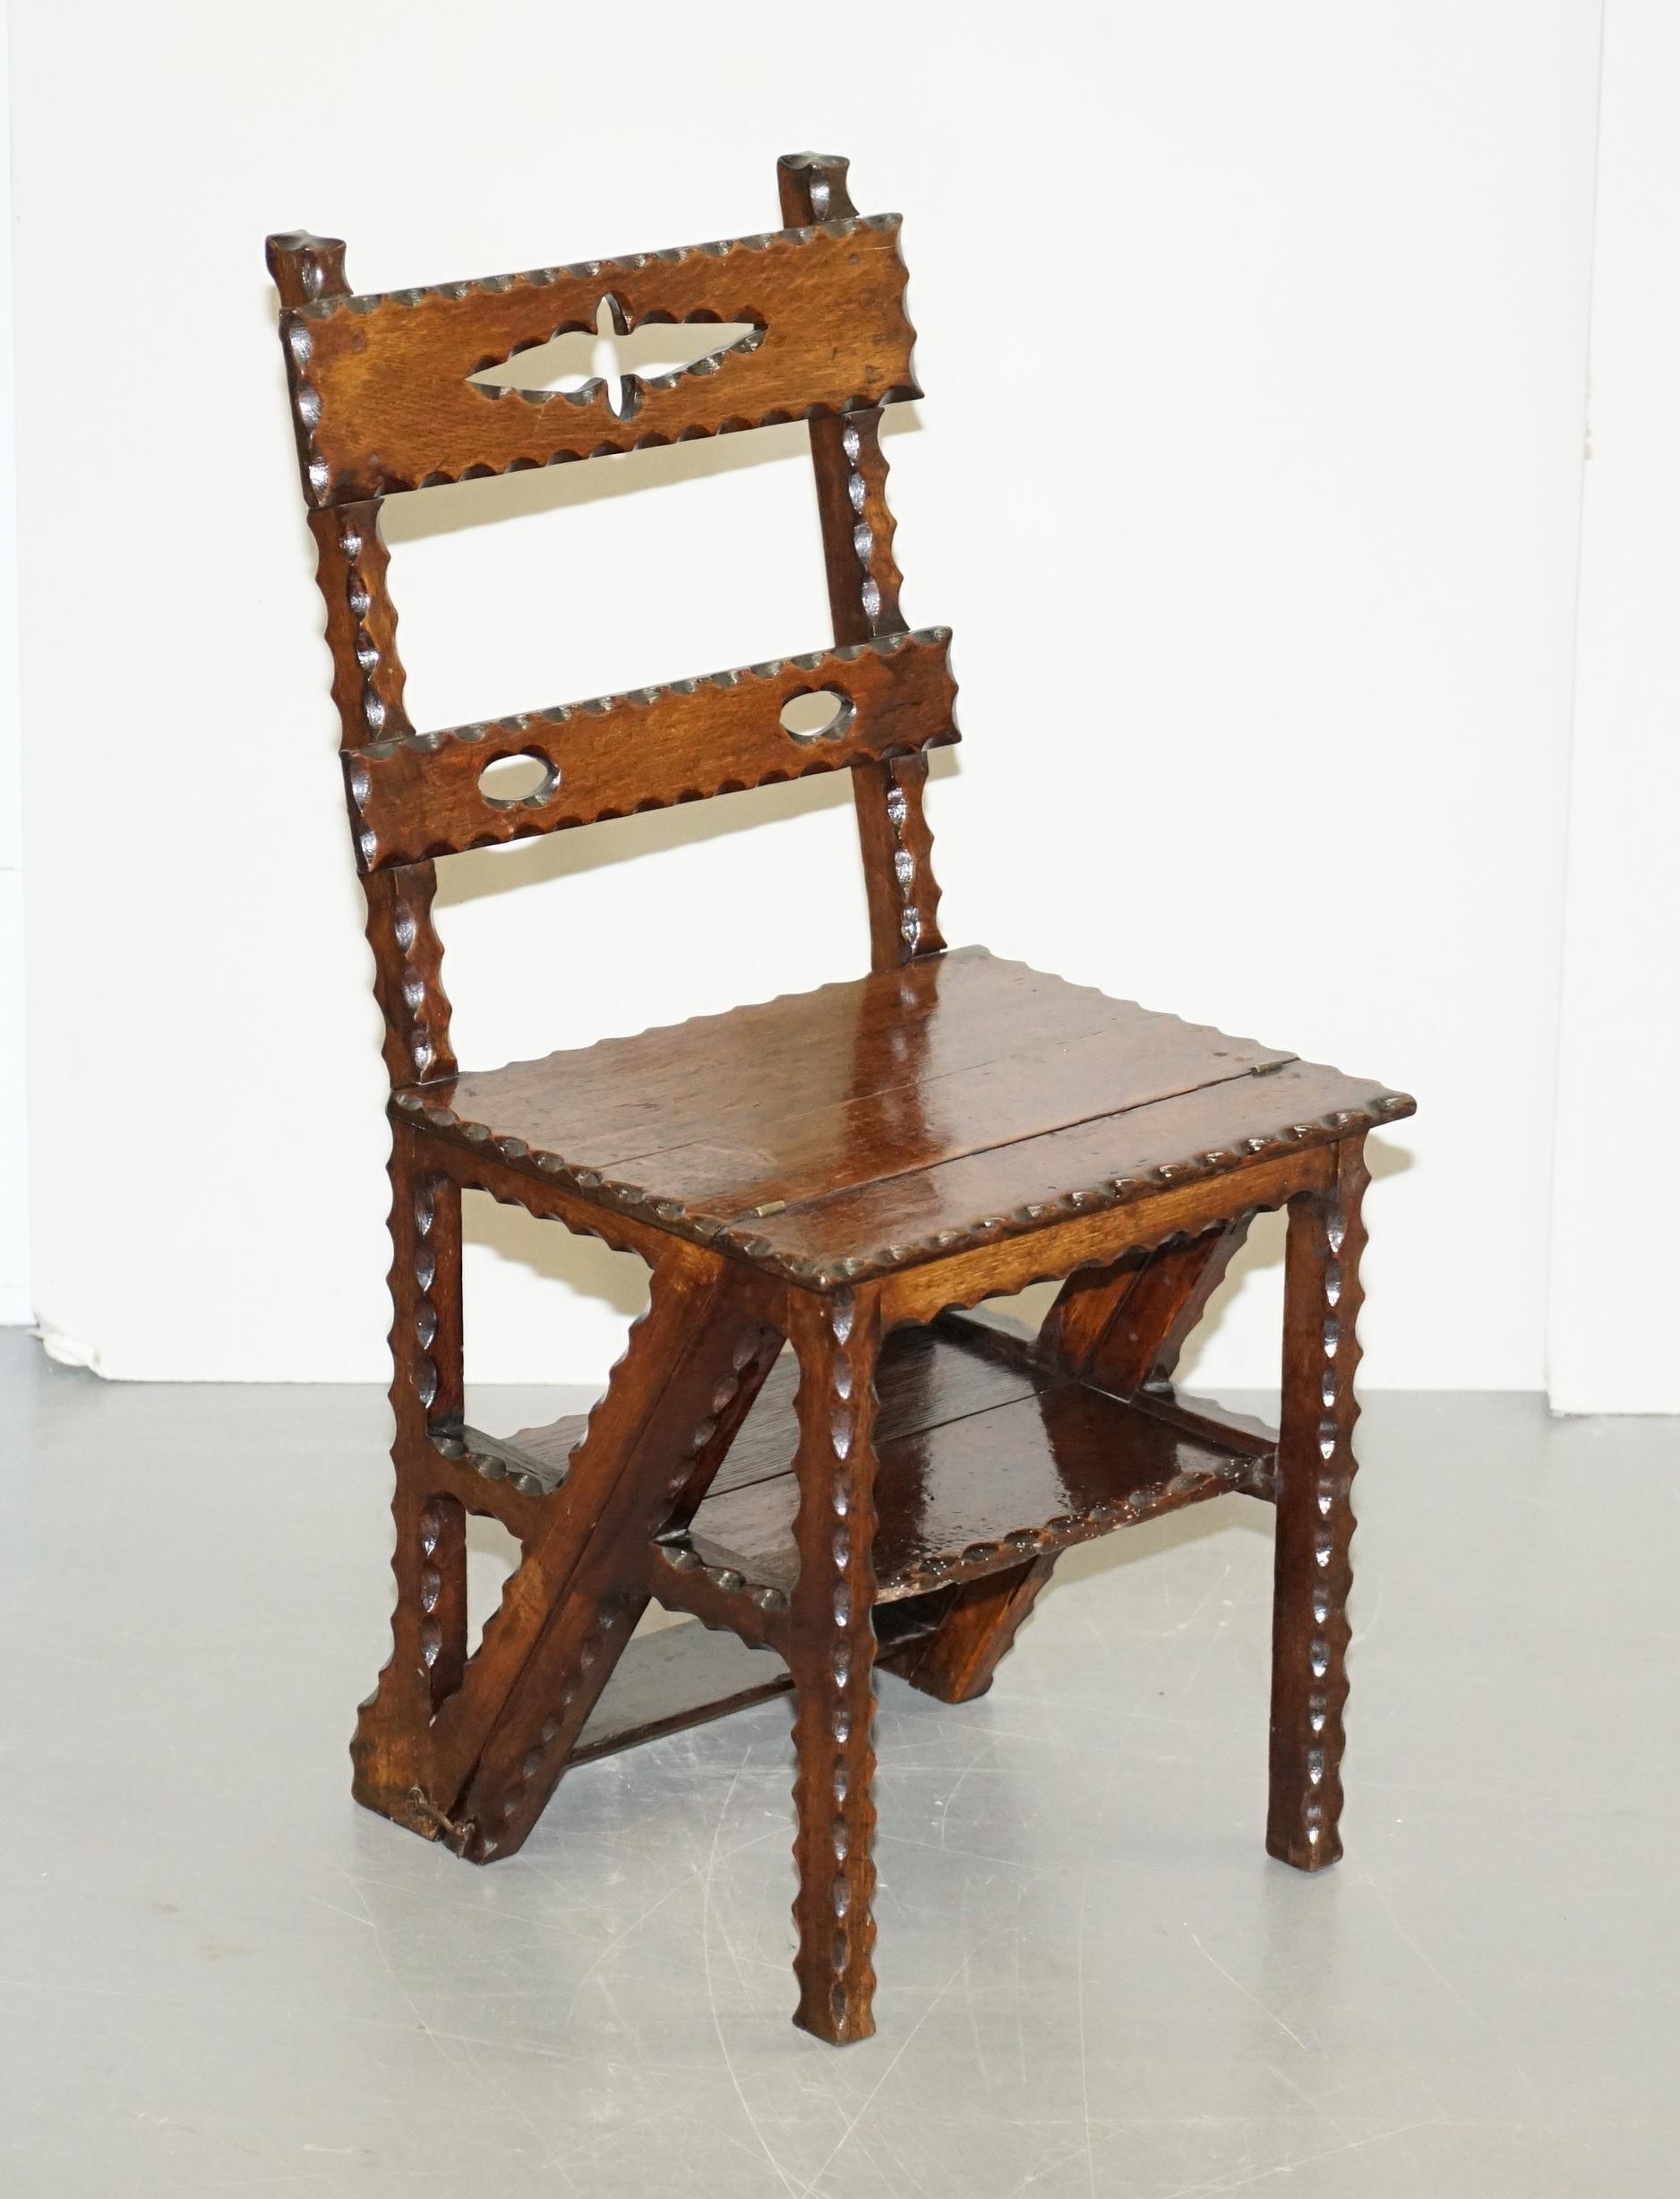 We are delighted to offer for sale this lovely hand carved late Victorian circa 1880-1890 metamorphic library steps into a side chair

I have bought maybe 2-3 sets of these in my time, I’ve seen a few more listed for sale, never with this